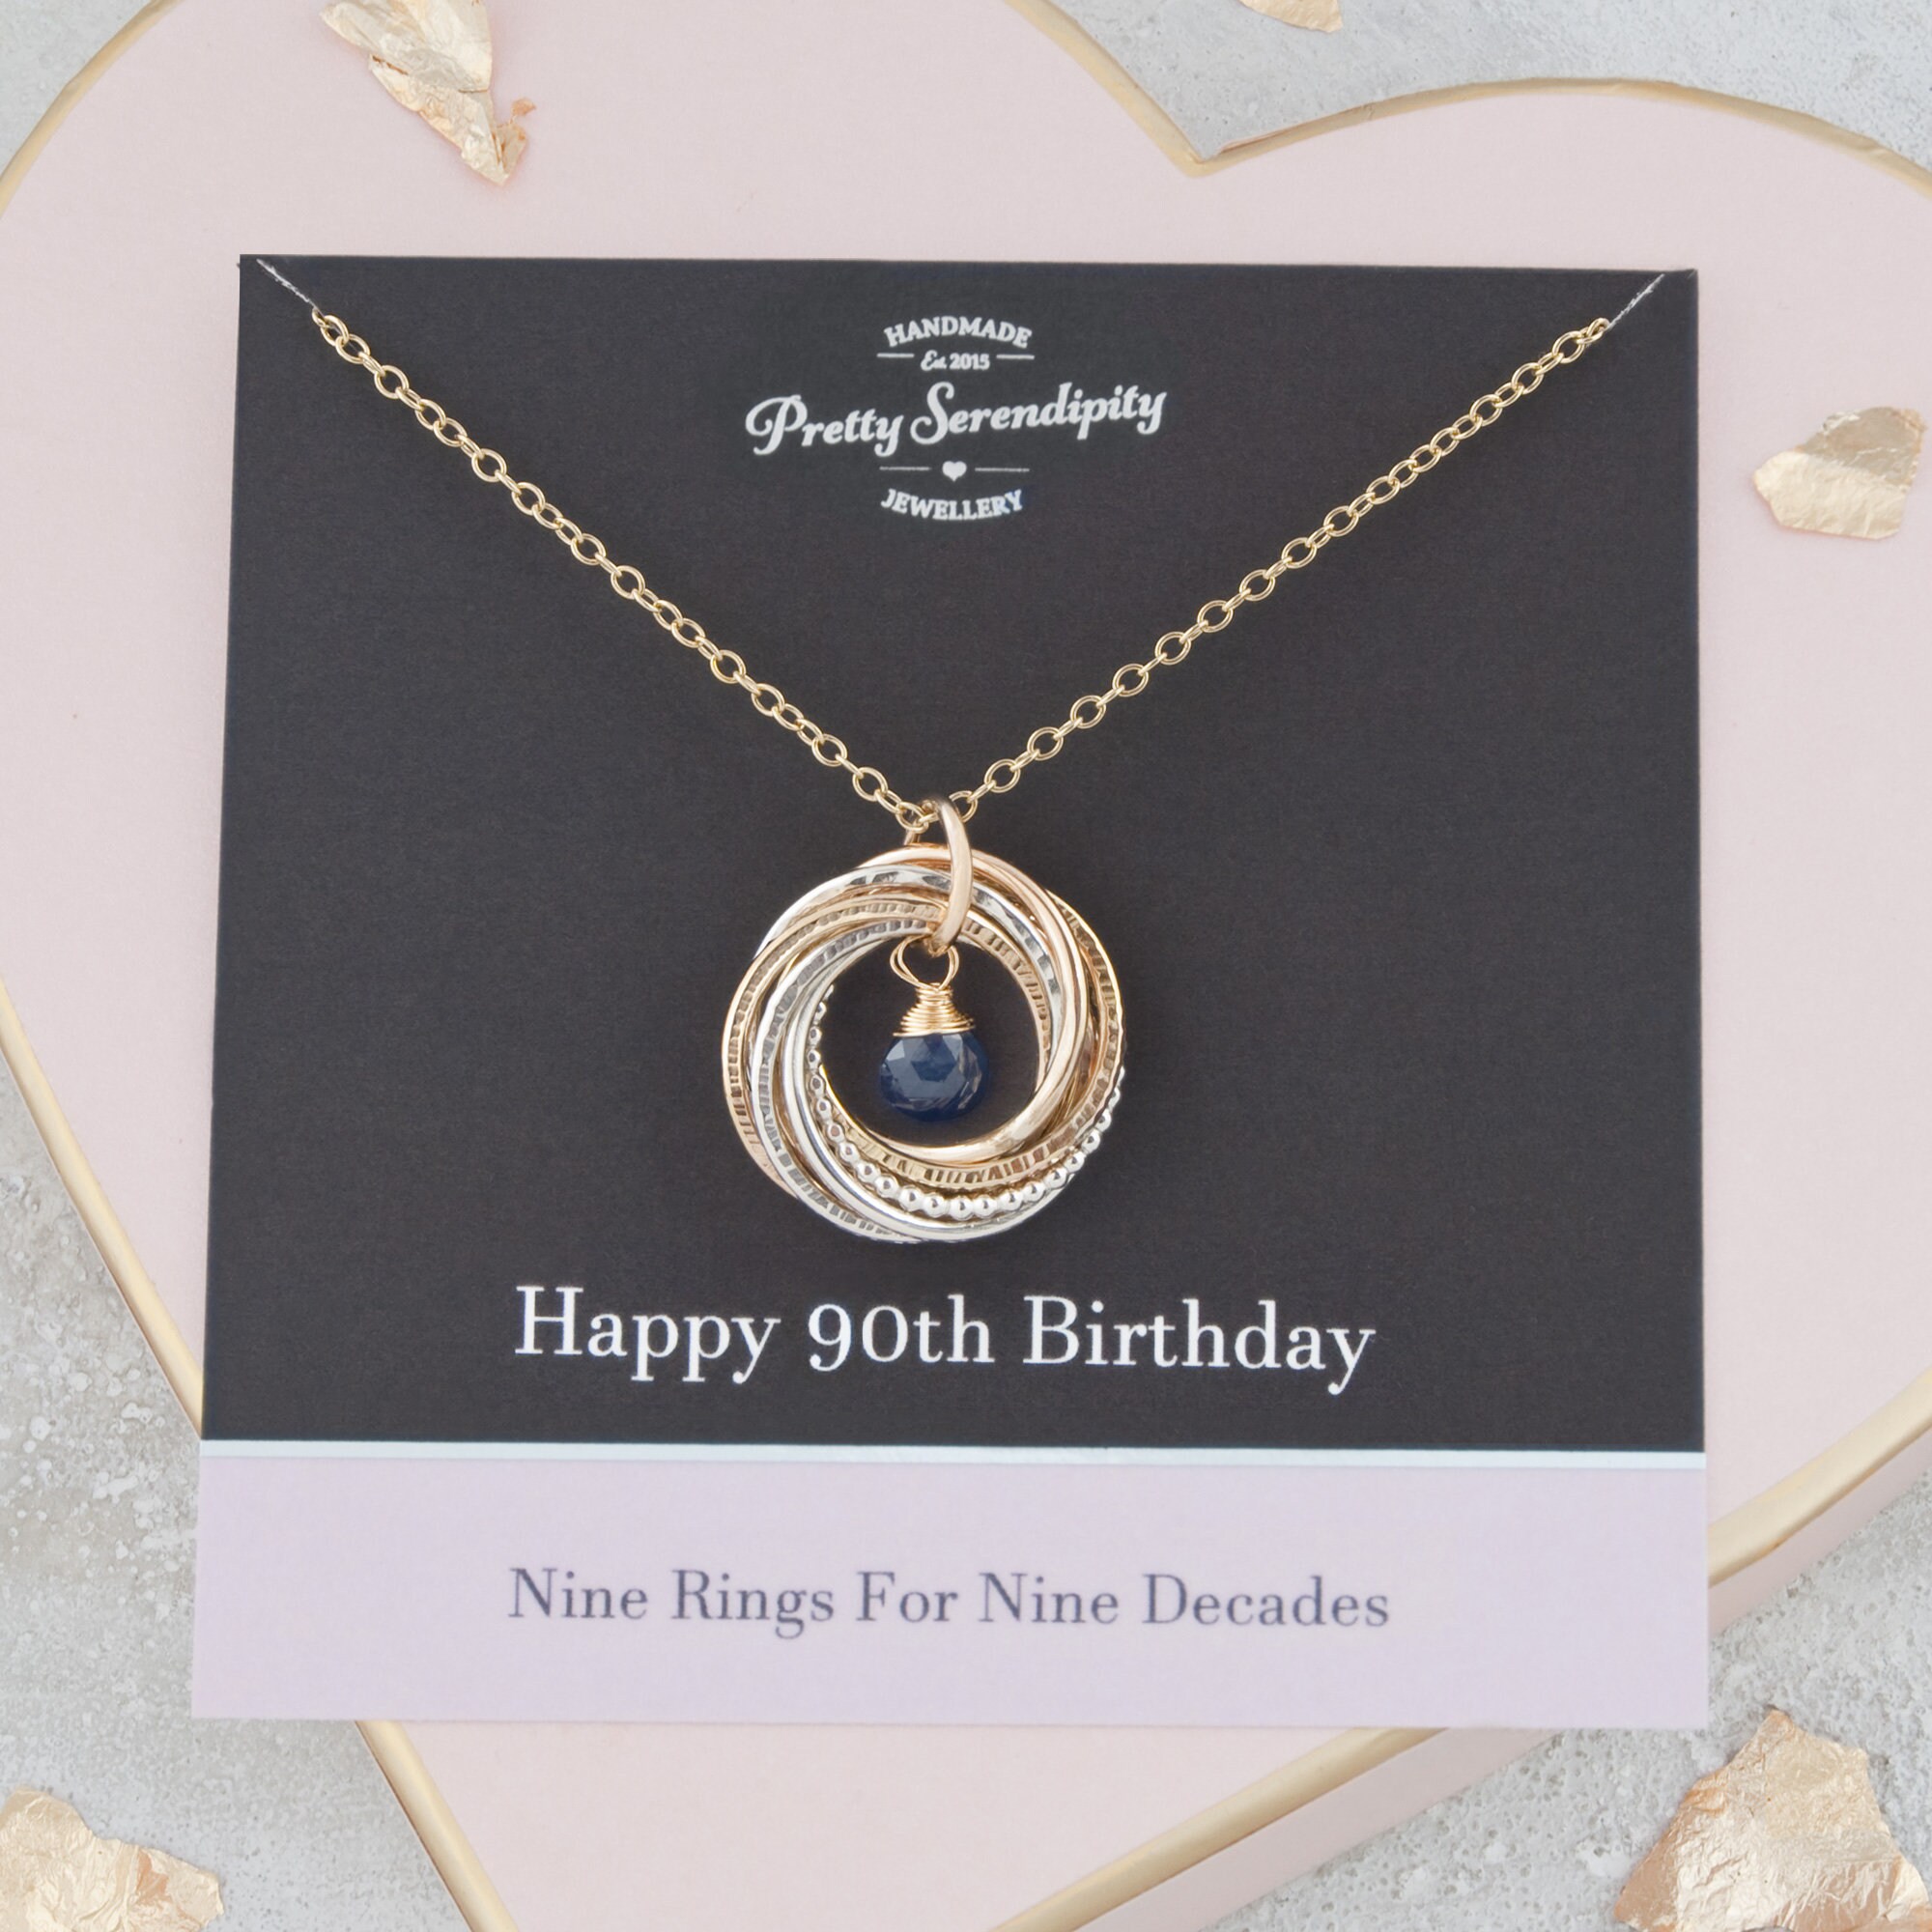 90Th Birthday Mixed Metal Birthstone Necklace - 9 Rings For Decades Gifts Her Silver & 14Ct Gold Fill